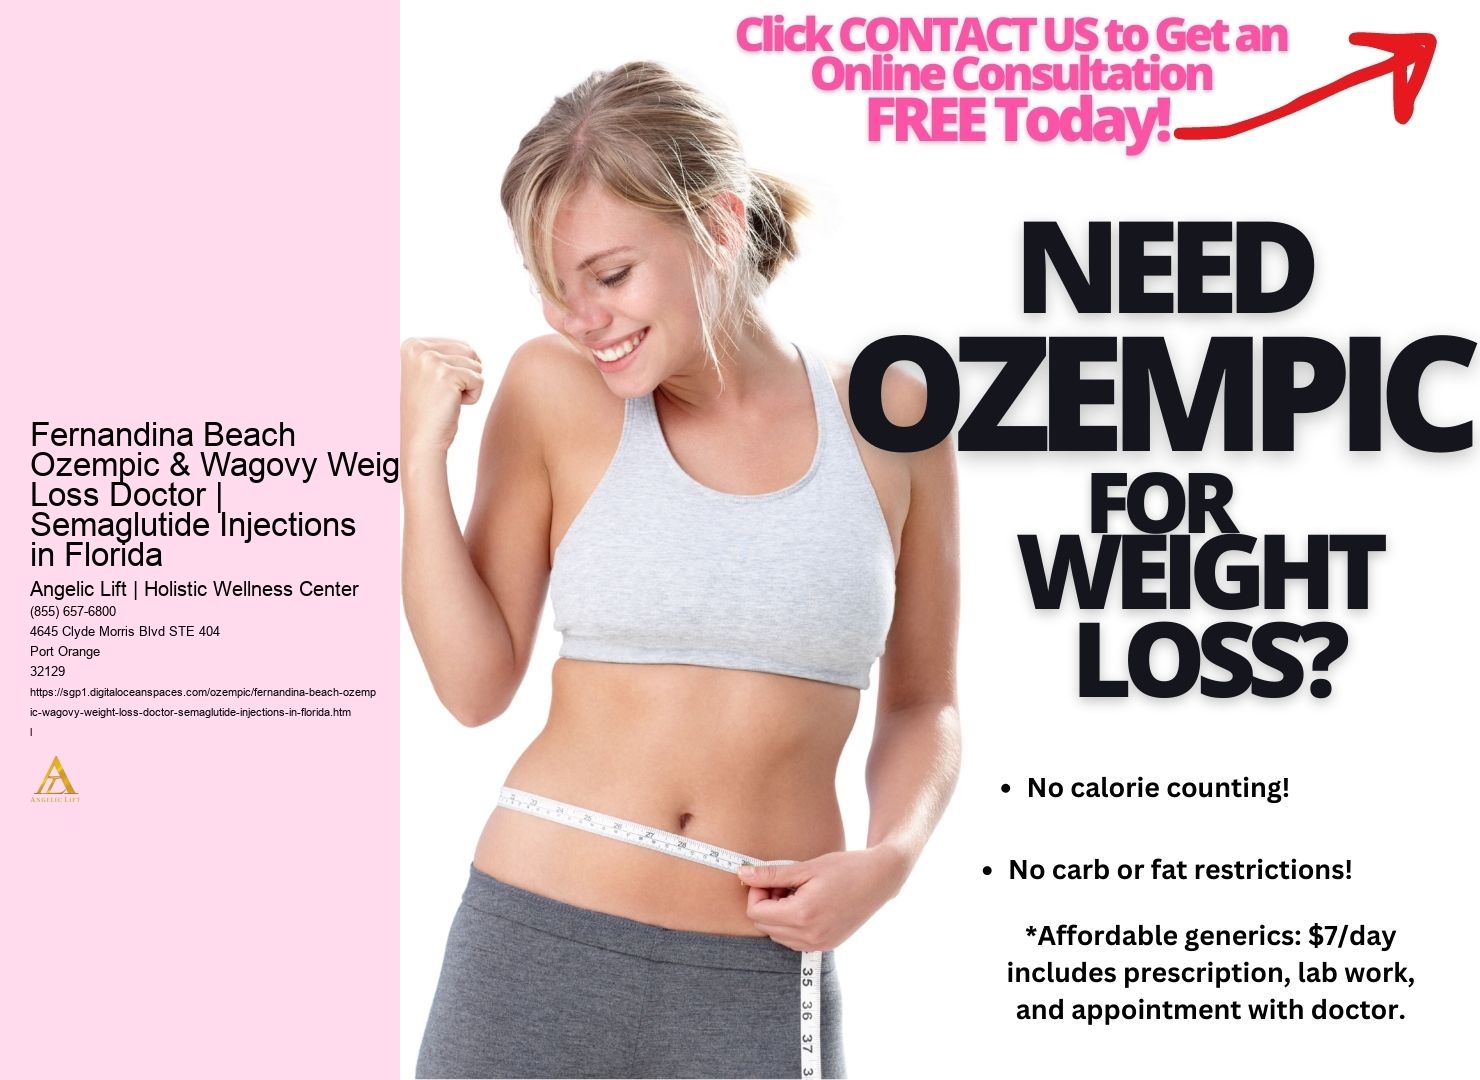 Fernandina Beach Ozempic & Wagovy Weight Loss Doctor | Semaglutide Injections in Florida